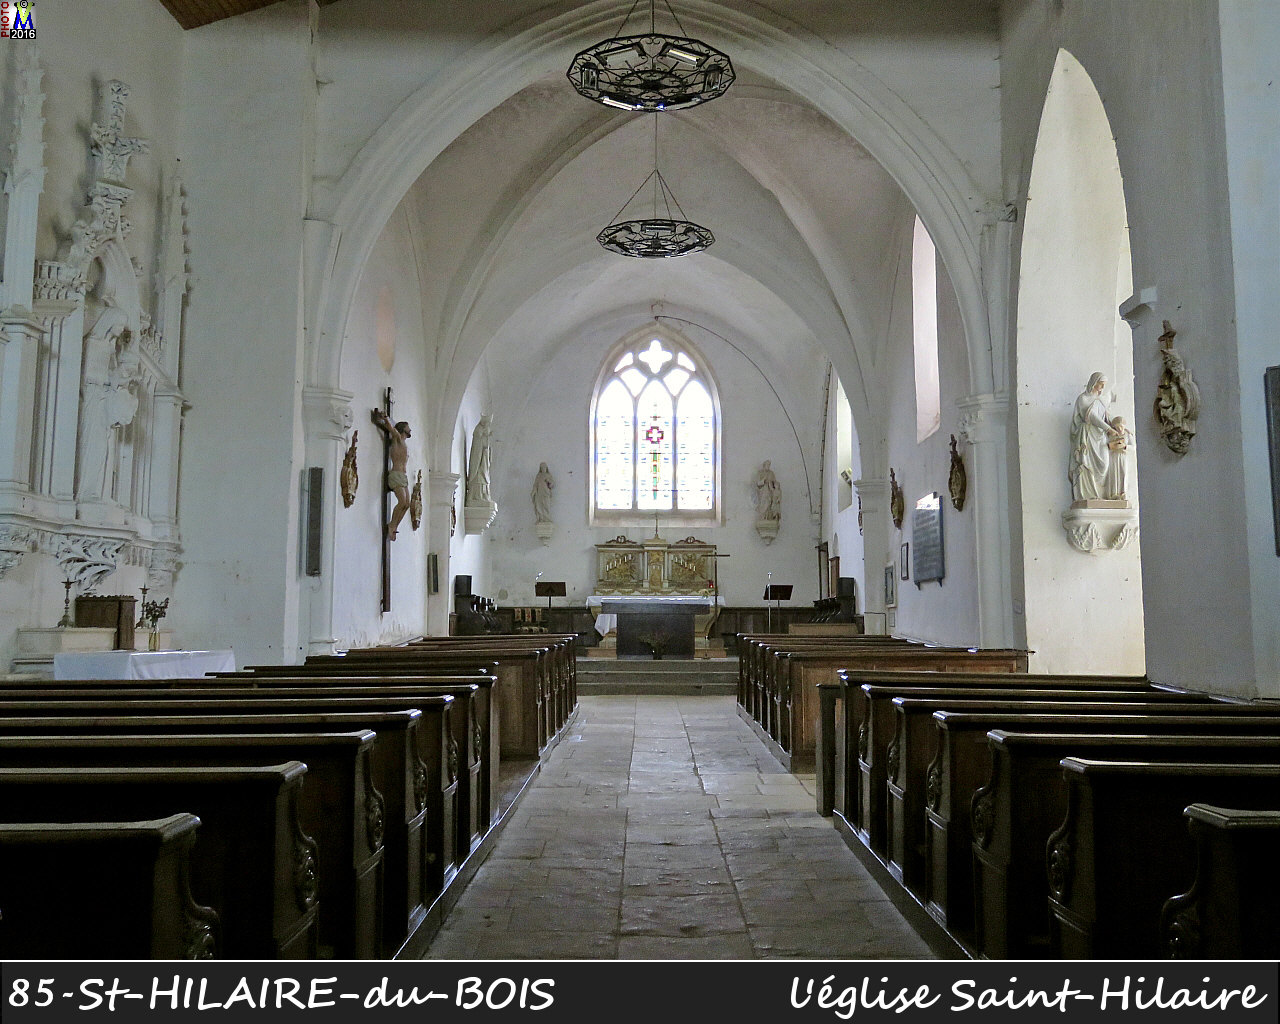 85CAILLERE-StHILAIRE-HILAIRE_eglise_1202.jpg